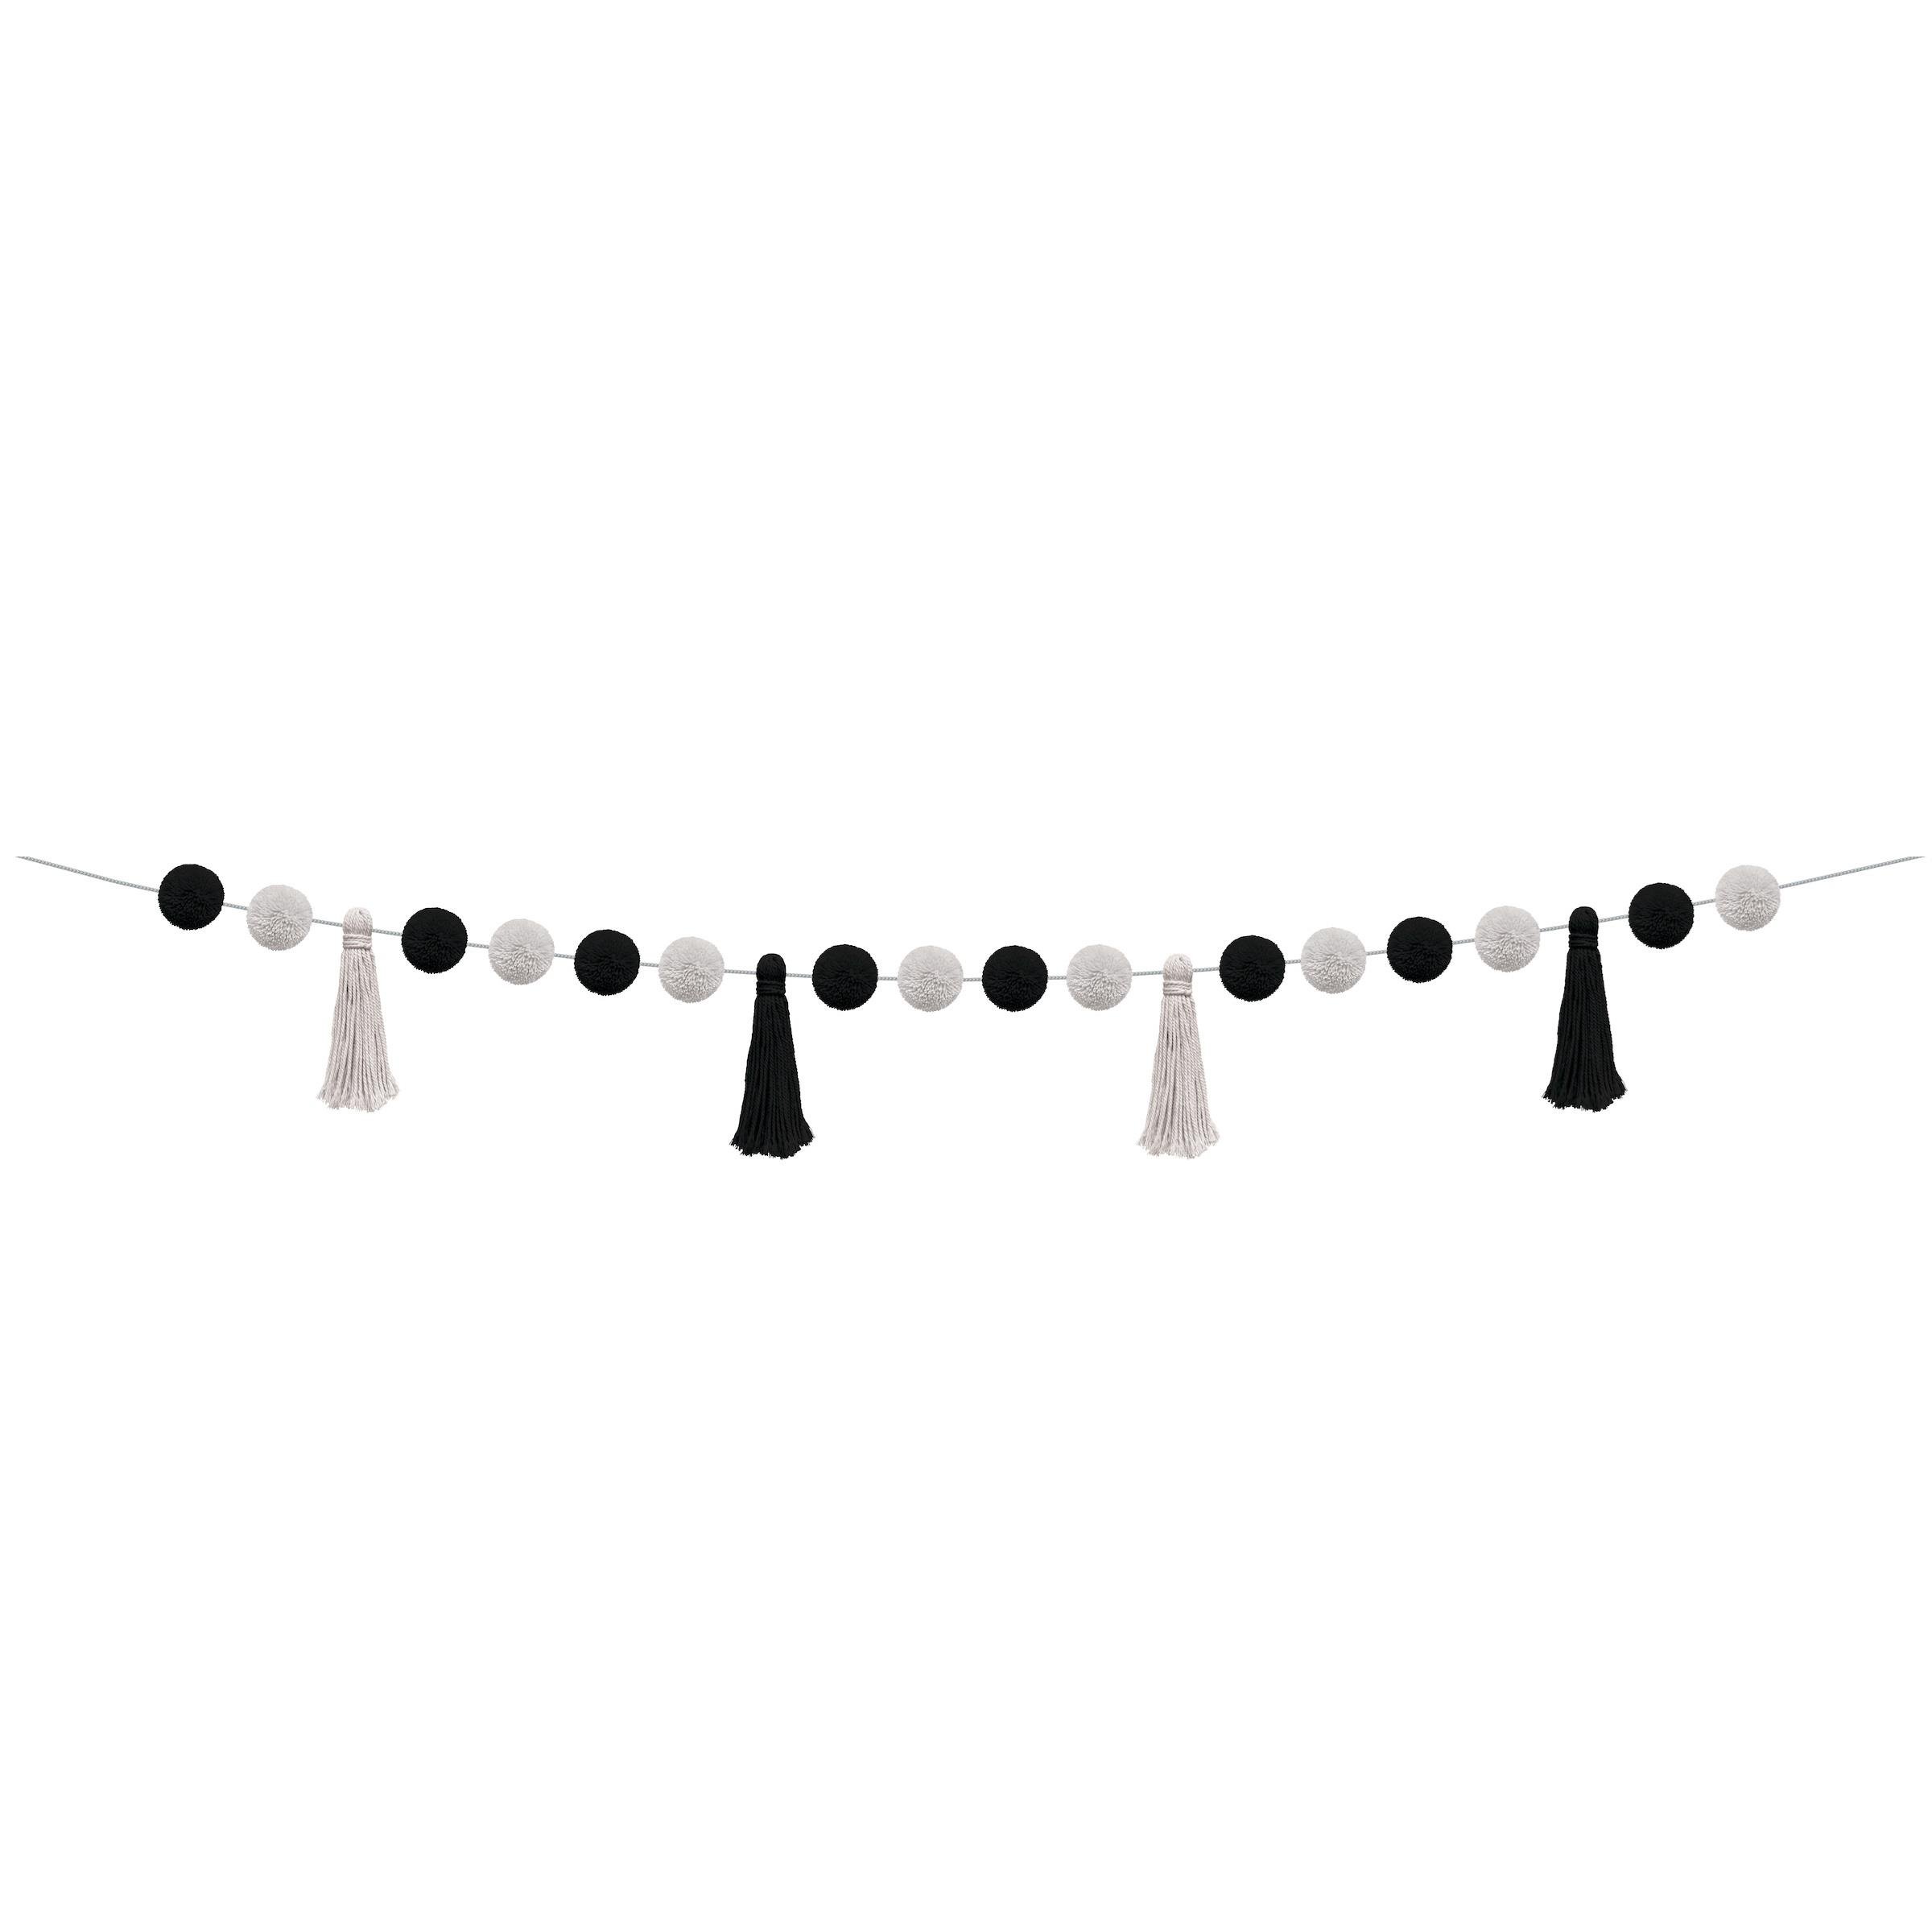 Black and White Pom-Poms and Tassels Garland - The School Box Inc